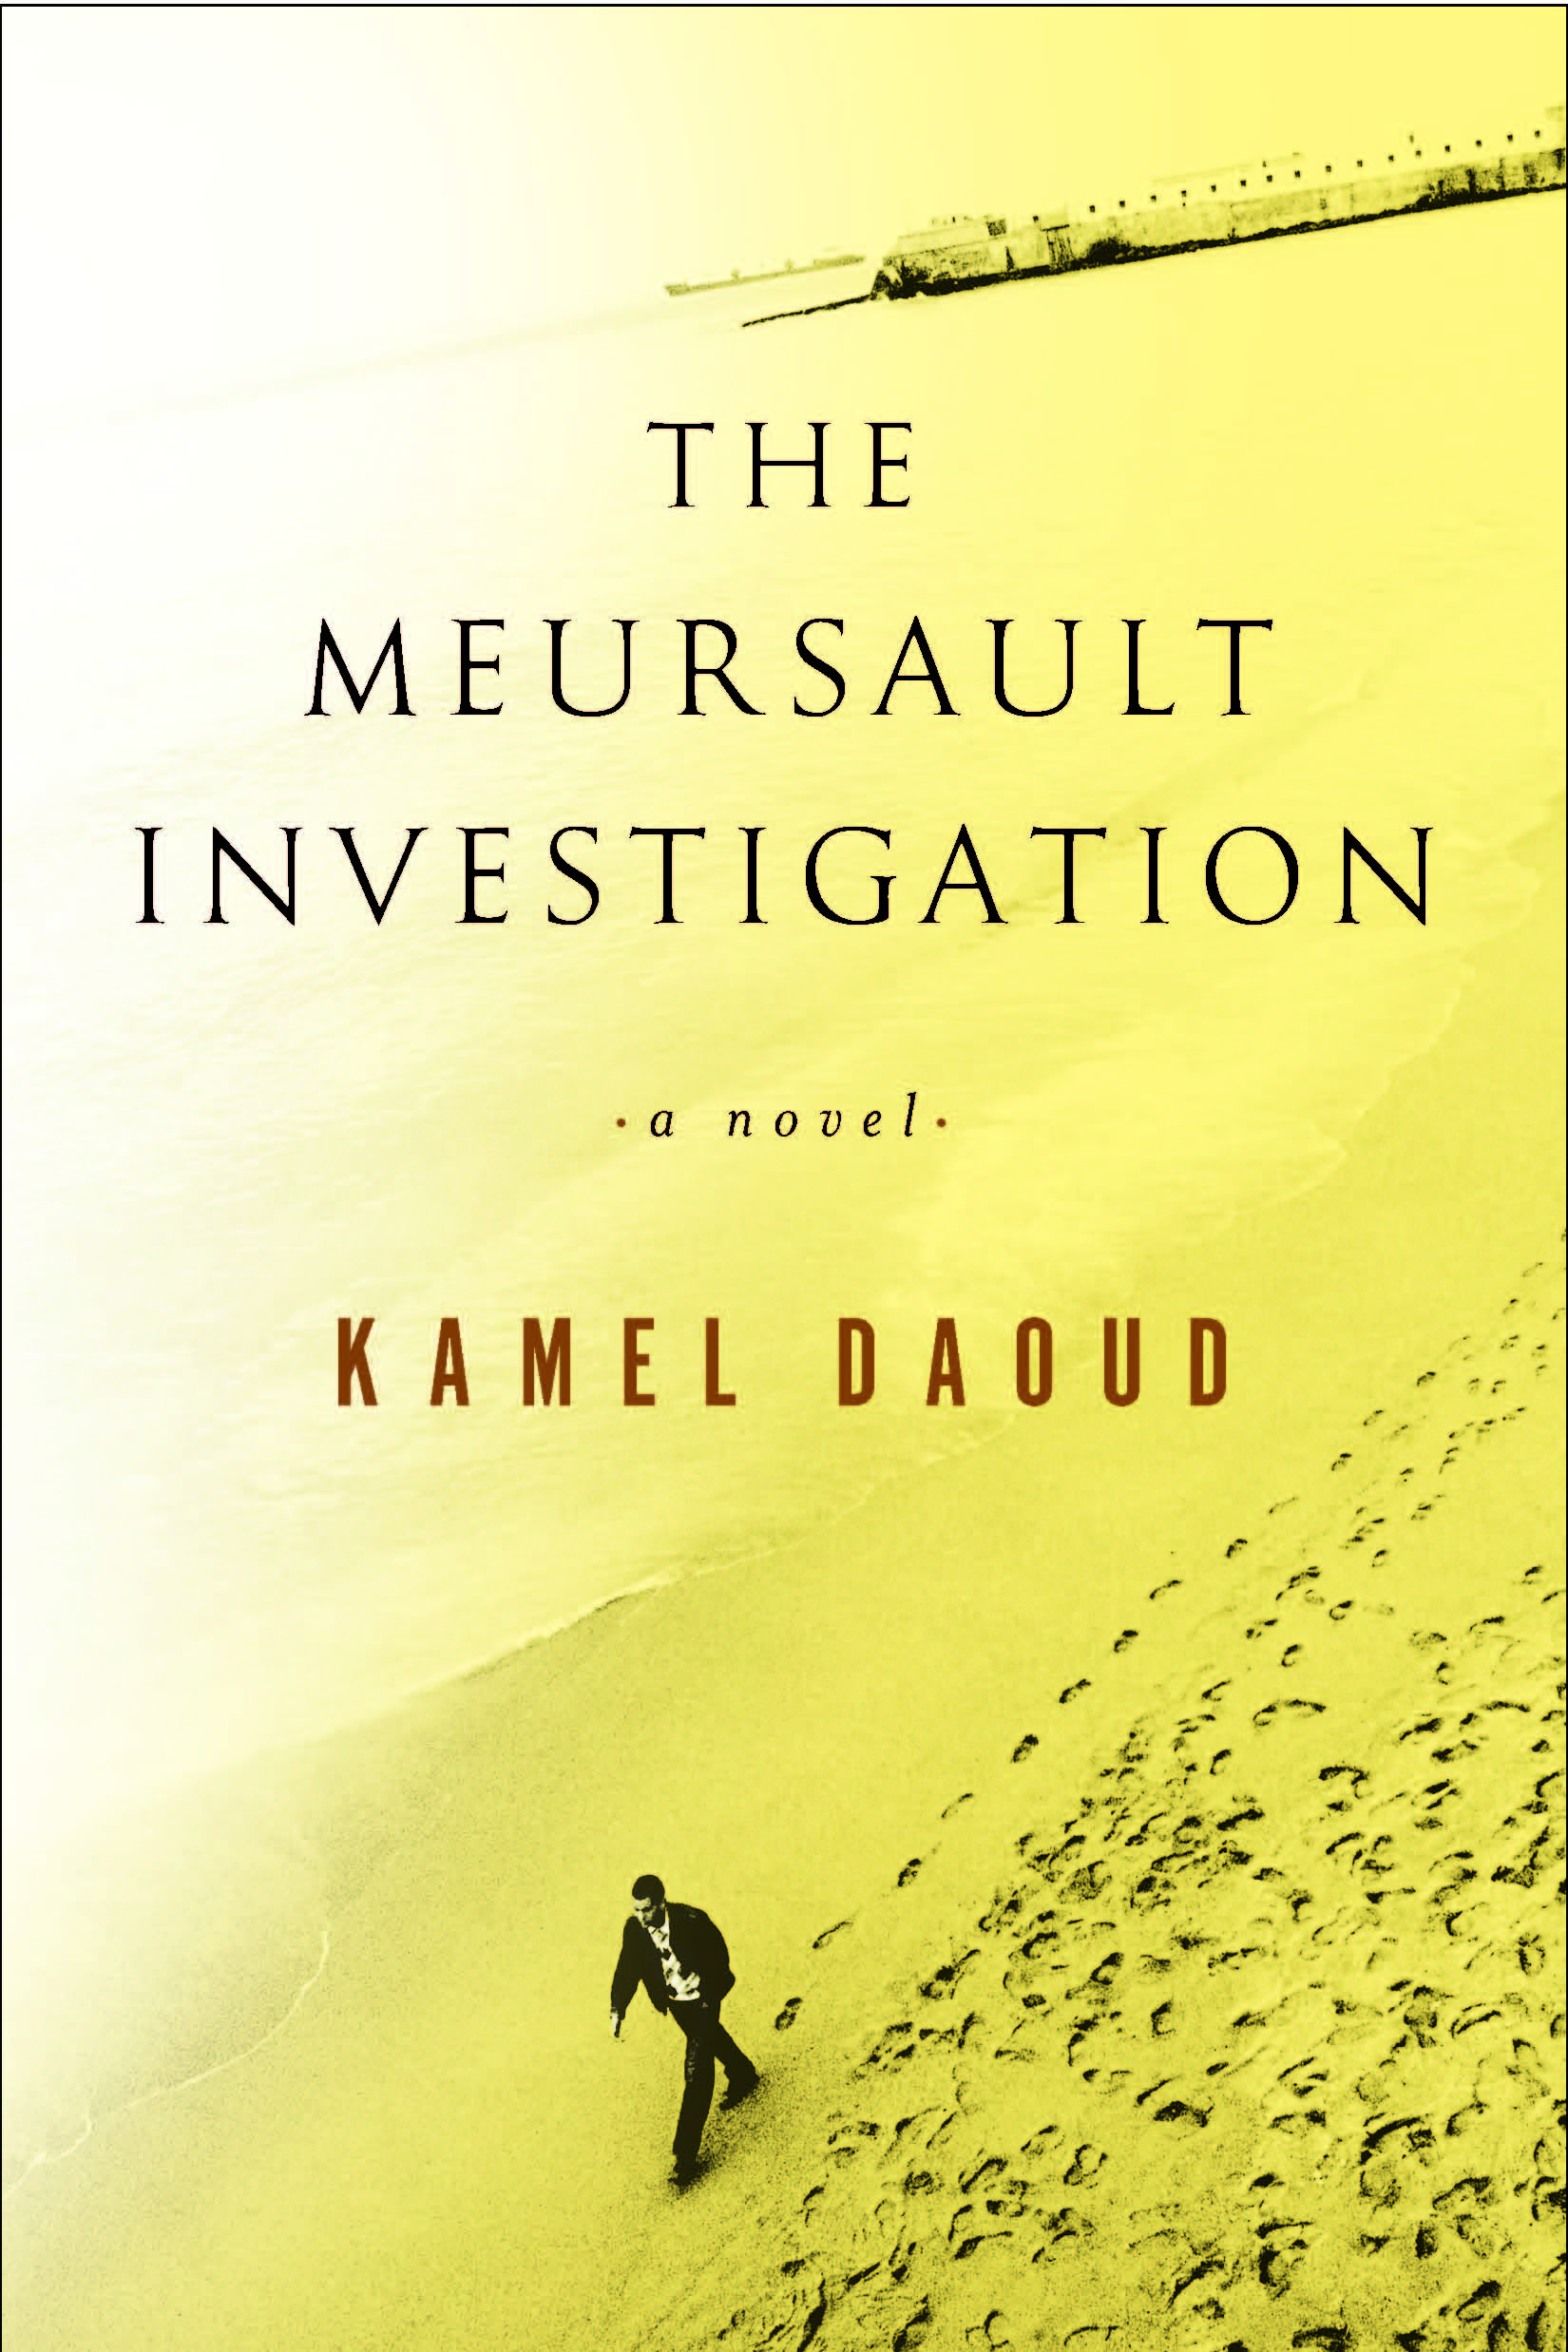 Cover of Kamel Daoud′s ″The Meursault Investigation″ translated by John Cullen (published by Other Press)